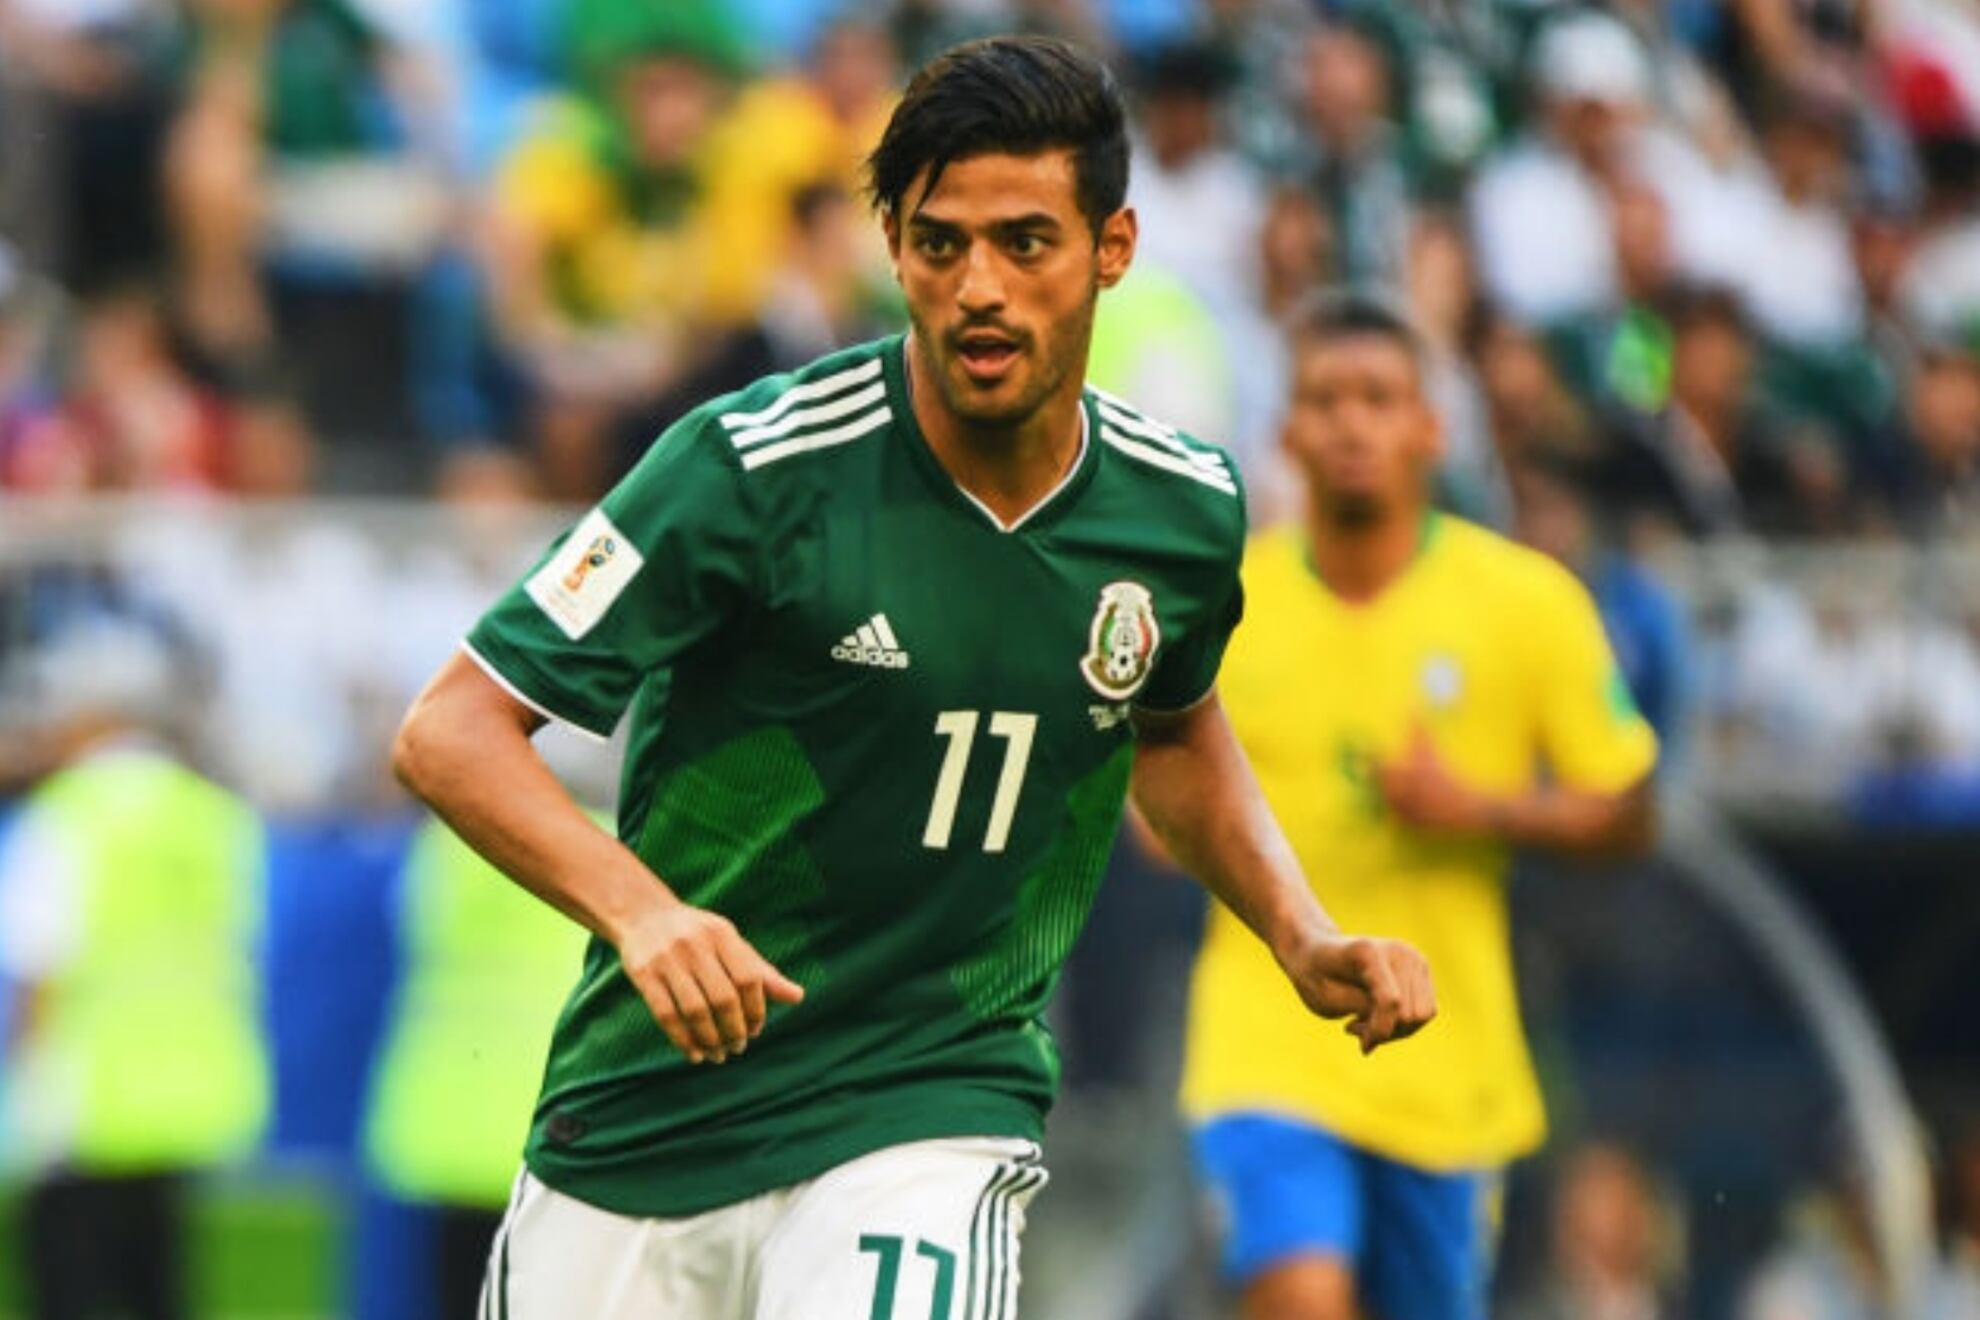 He coached USMNT but now could arrive in Mexico National Team and call Carlos Vela